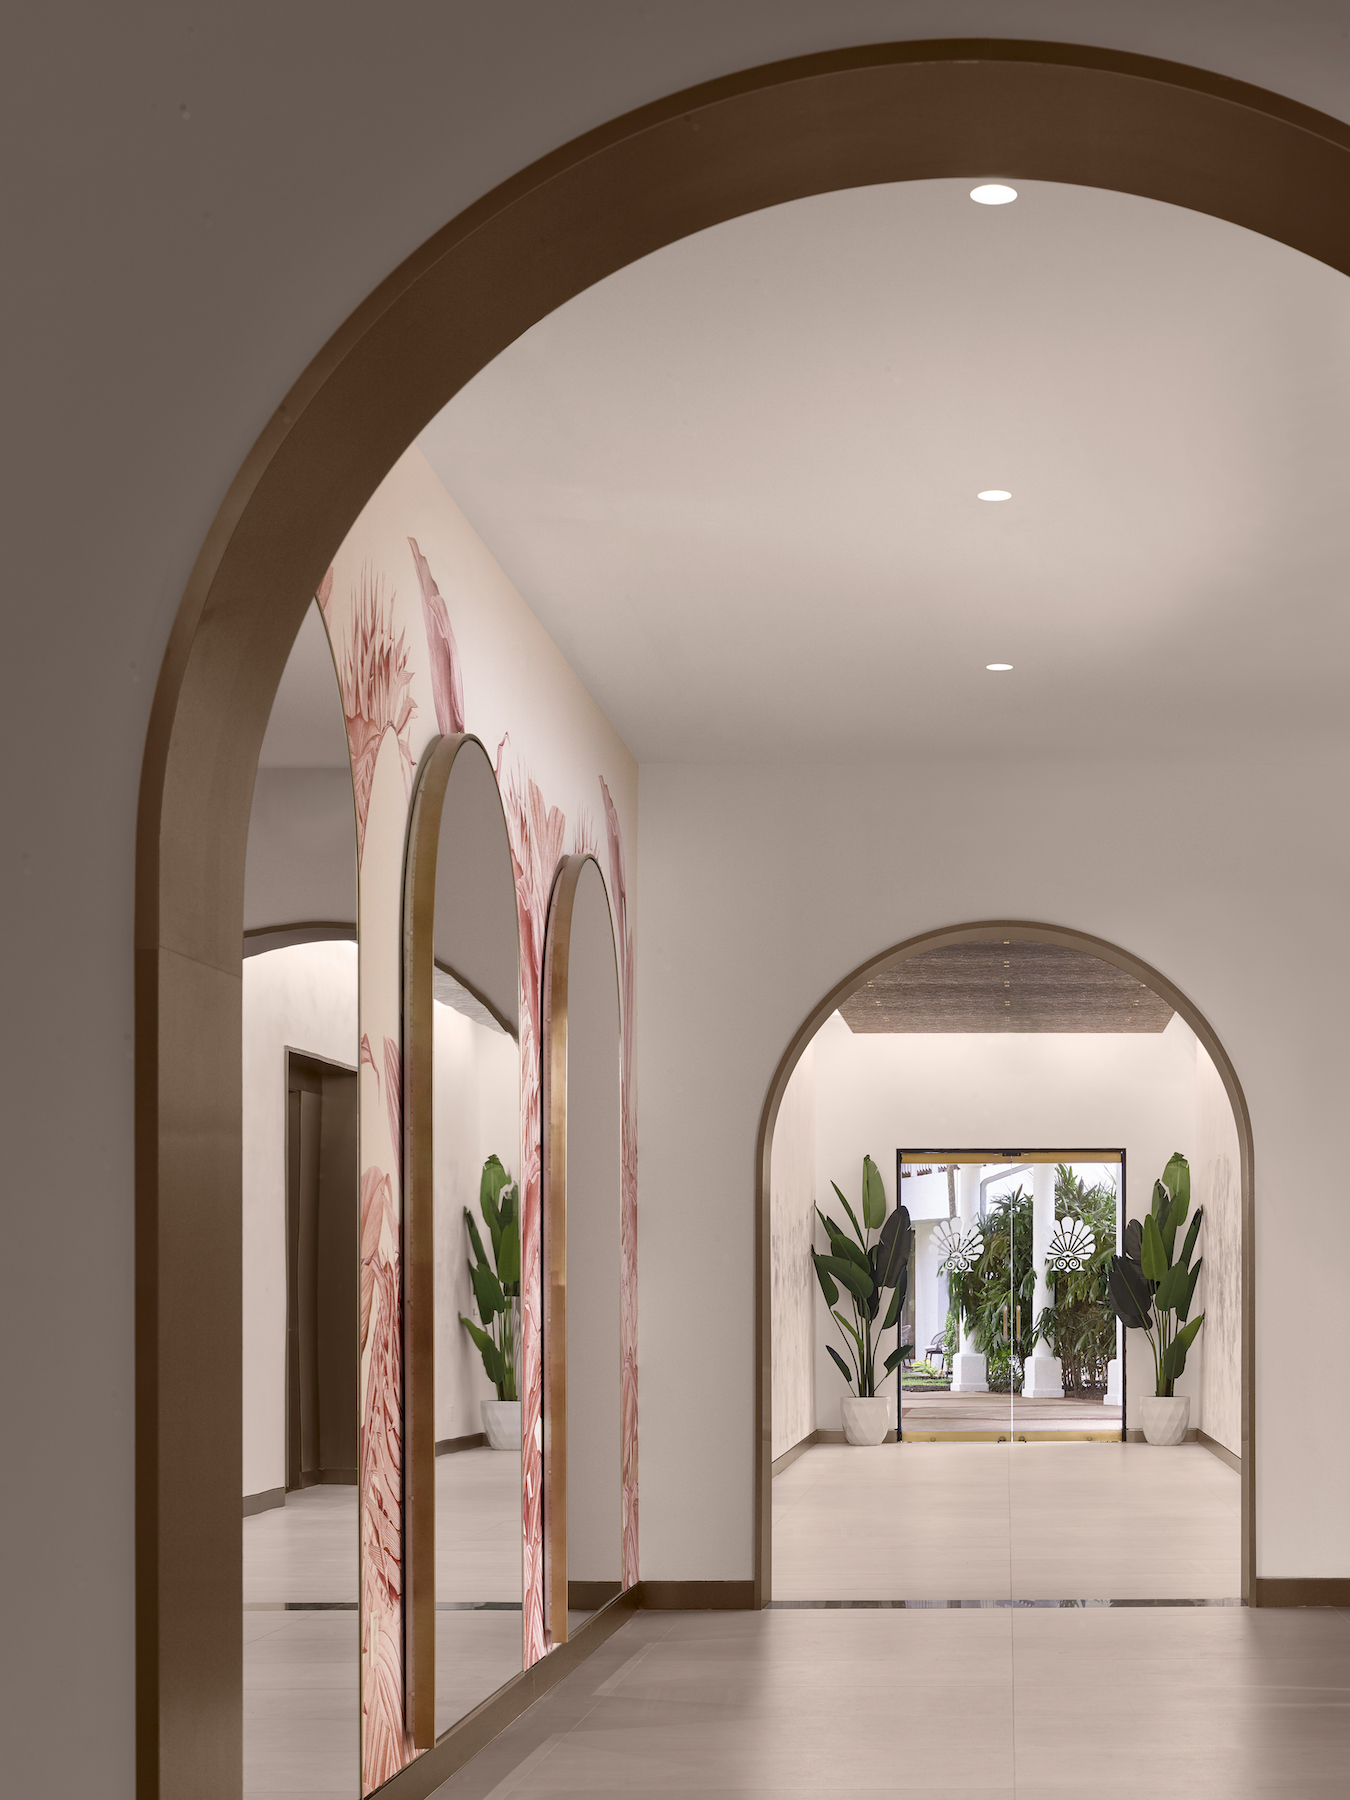 Venus Williams firm V Starr created the interior design for the spa at PGA National Resort in Florida – Effect Magazine - Effetto